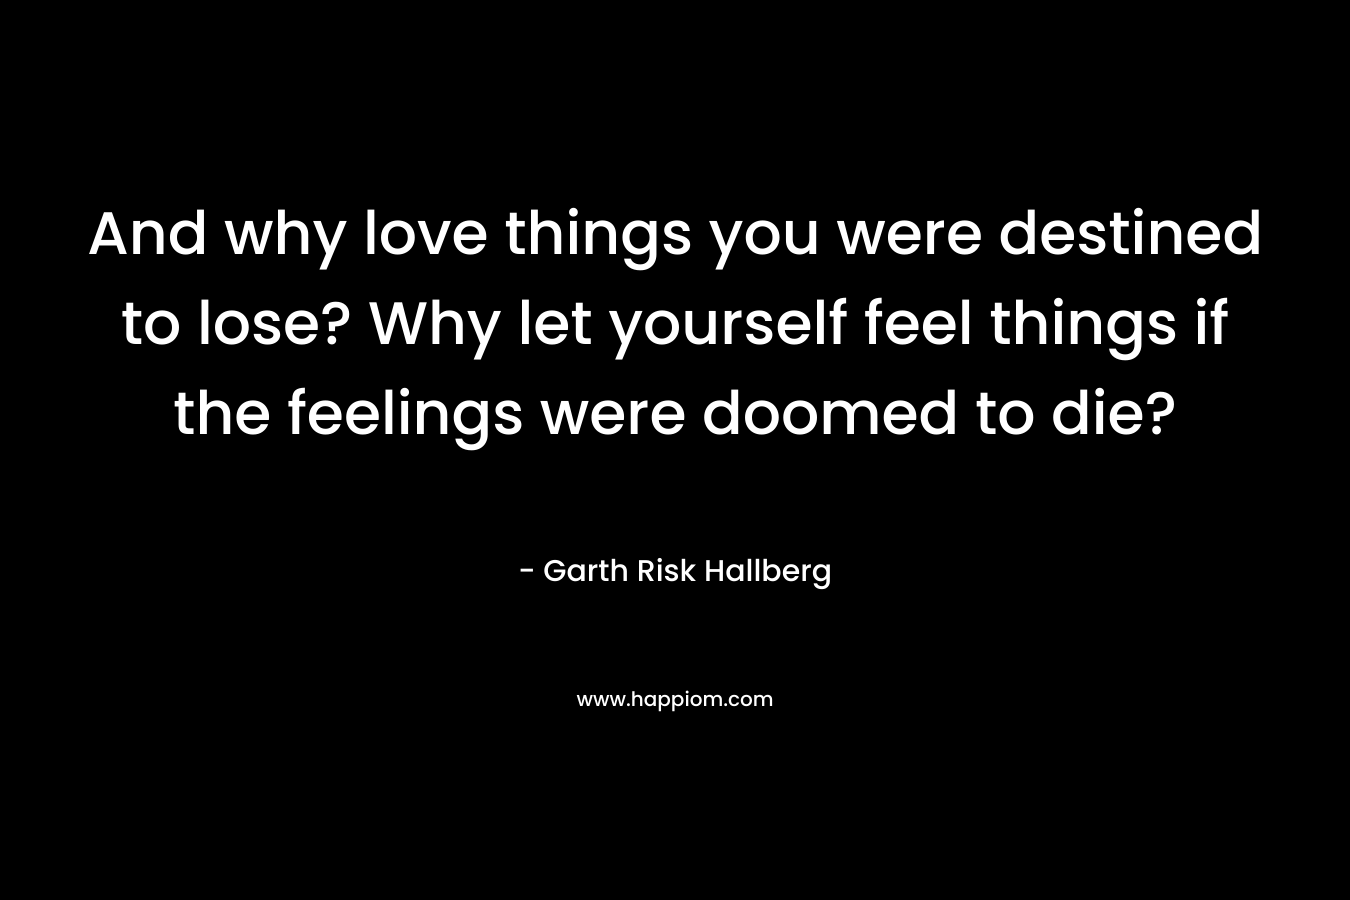 And why love things you were destined to lose? Why let yourself feel things if the feelings were doomed to die?